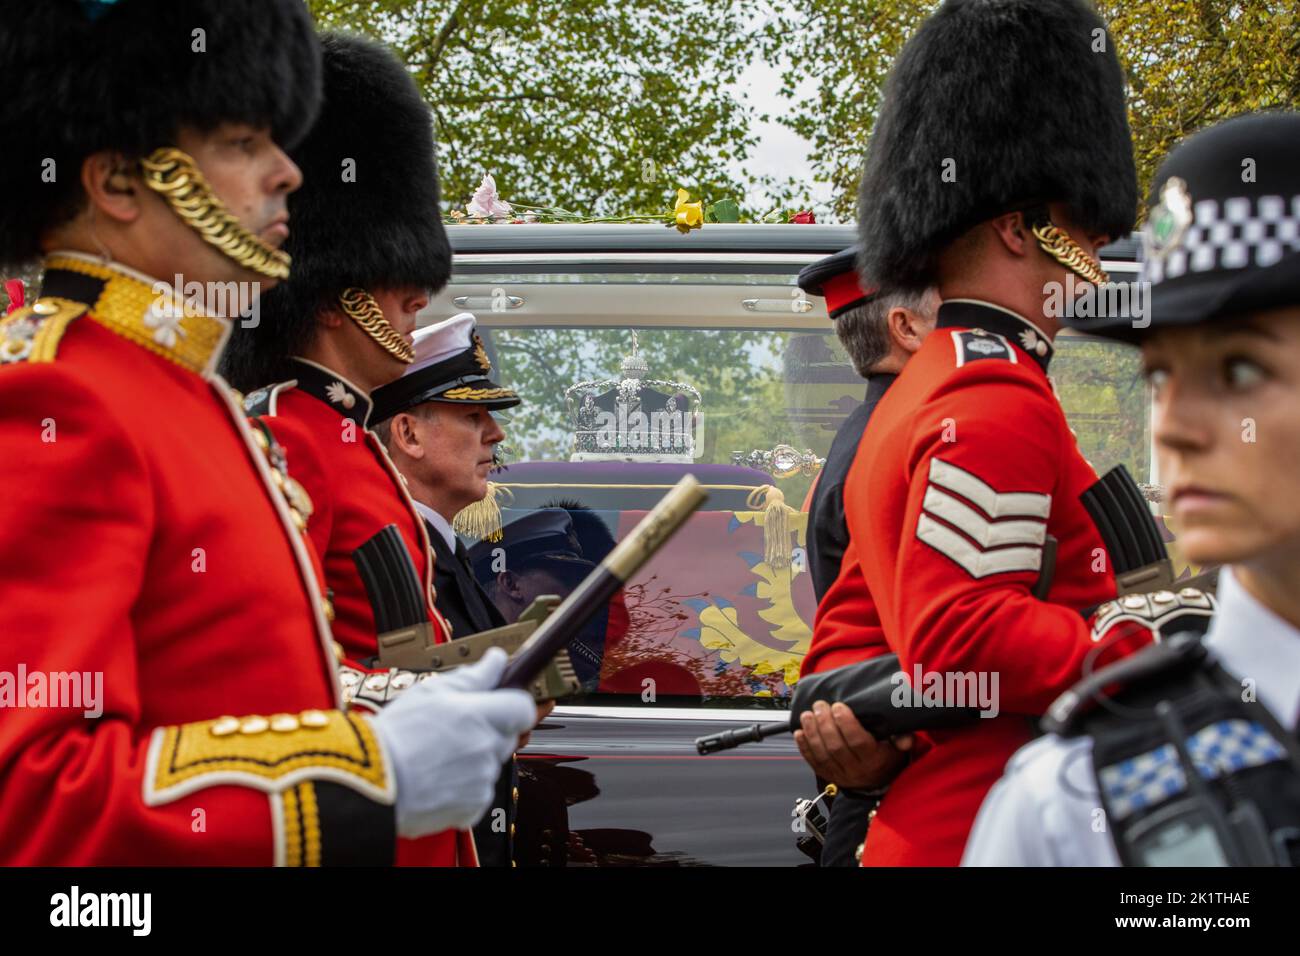 Windsor, UK. 19th September, 2022. Grenadier Guards and other military personnel escort Queen Elizabeth II's coffin lying with the Imperial State Crown in the State Hearse on the Long Walk in Windsor Great Park during a procession from Shaw Farm Gate to St George’s Chapel for the Committal Service. Queen Elizabeth II, the UK's longest-serving monarch, died at Balmoral aged 96 on 8th September 2022 after a reign lasting 70 years. Credit: Mark Kerrison/Alamy Live News Stock Photo